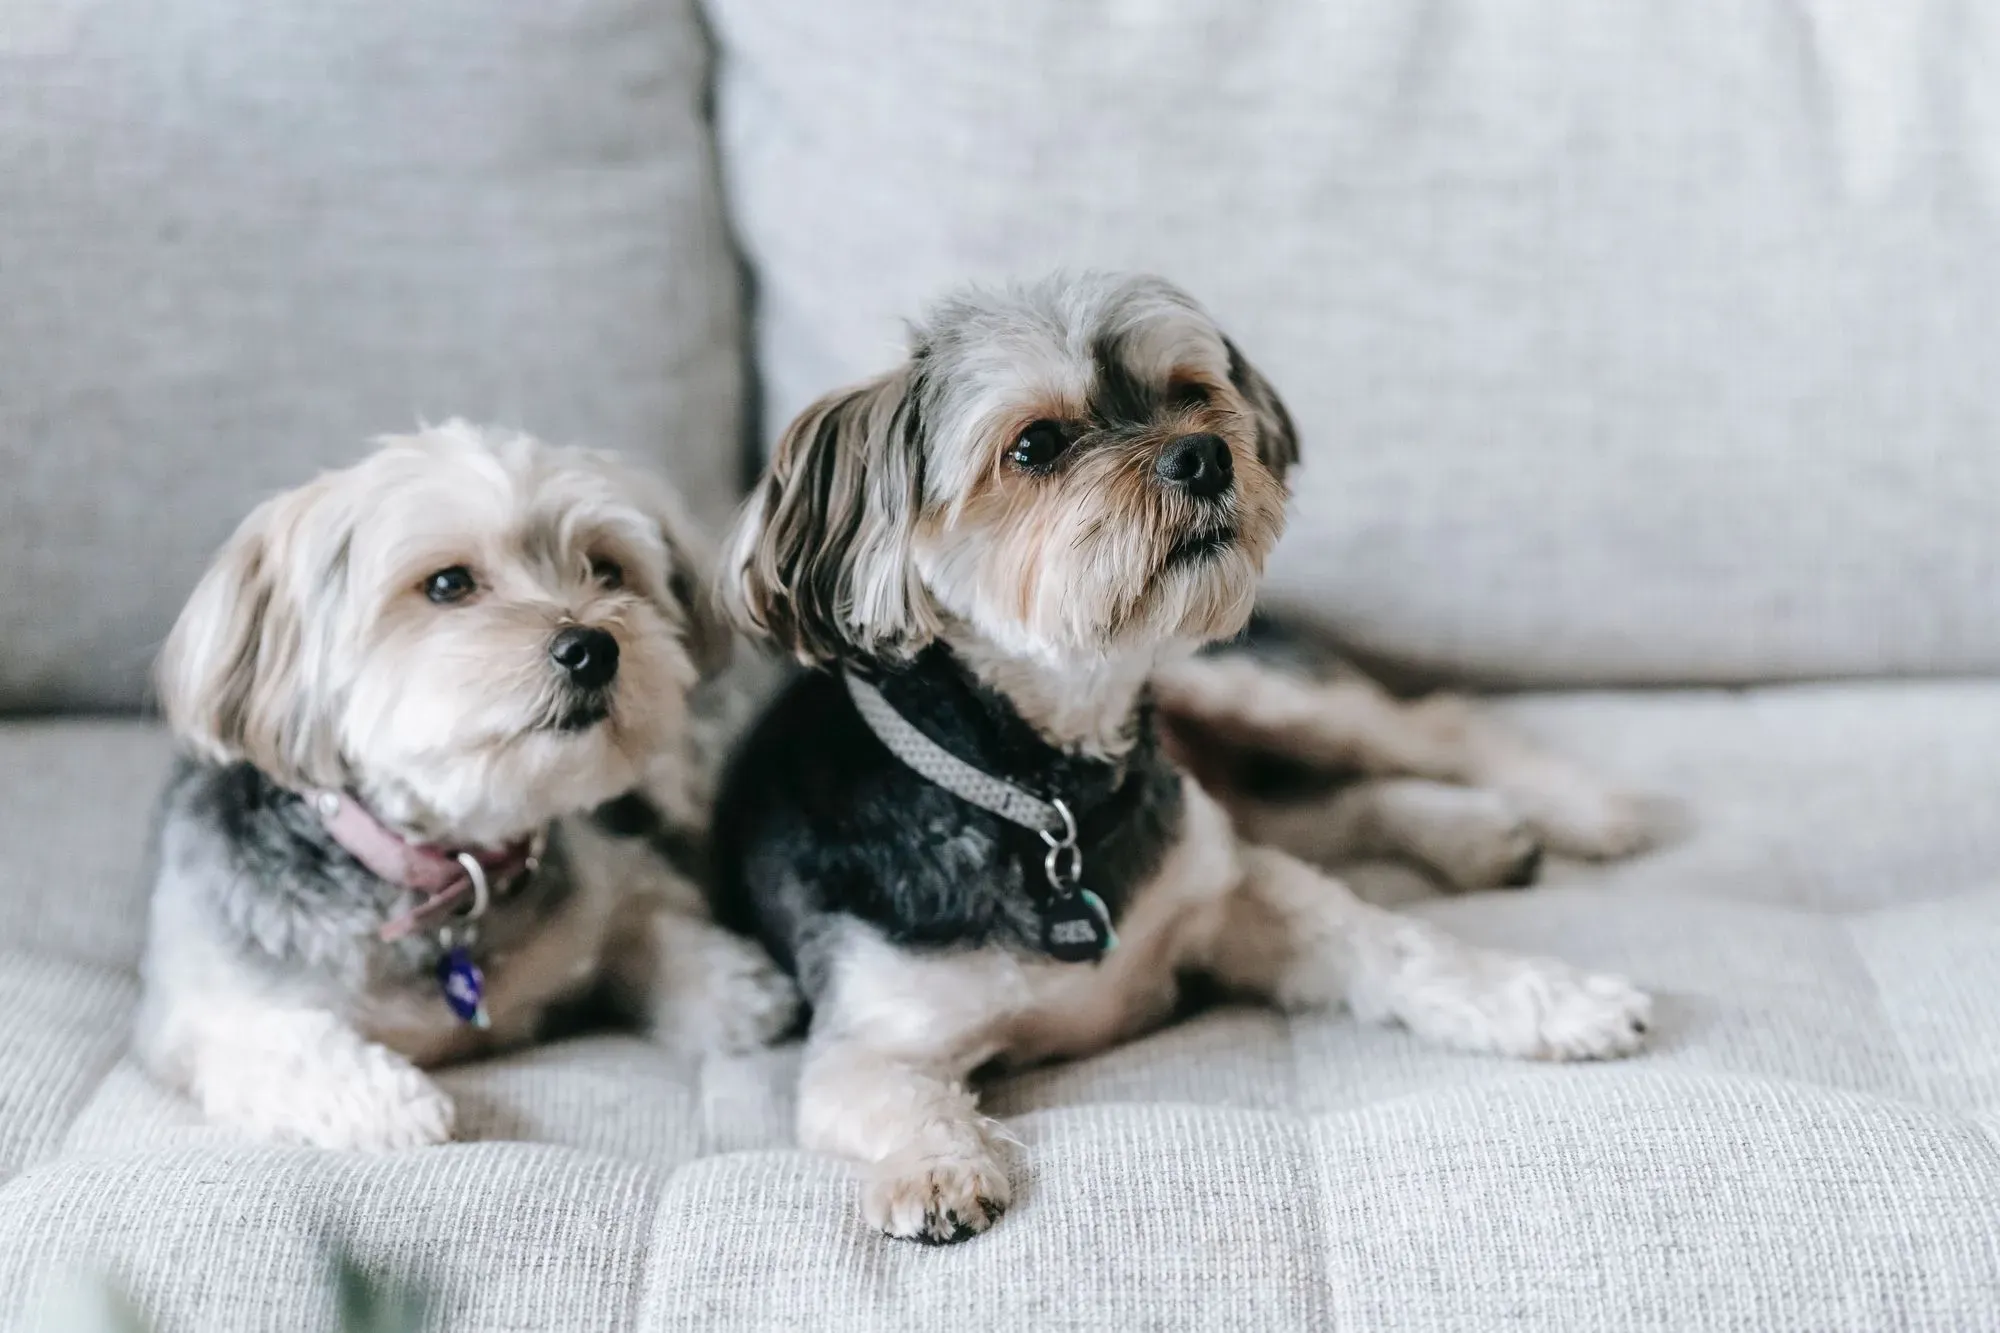 Facts about the Morkie temperament are interesting to read!